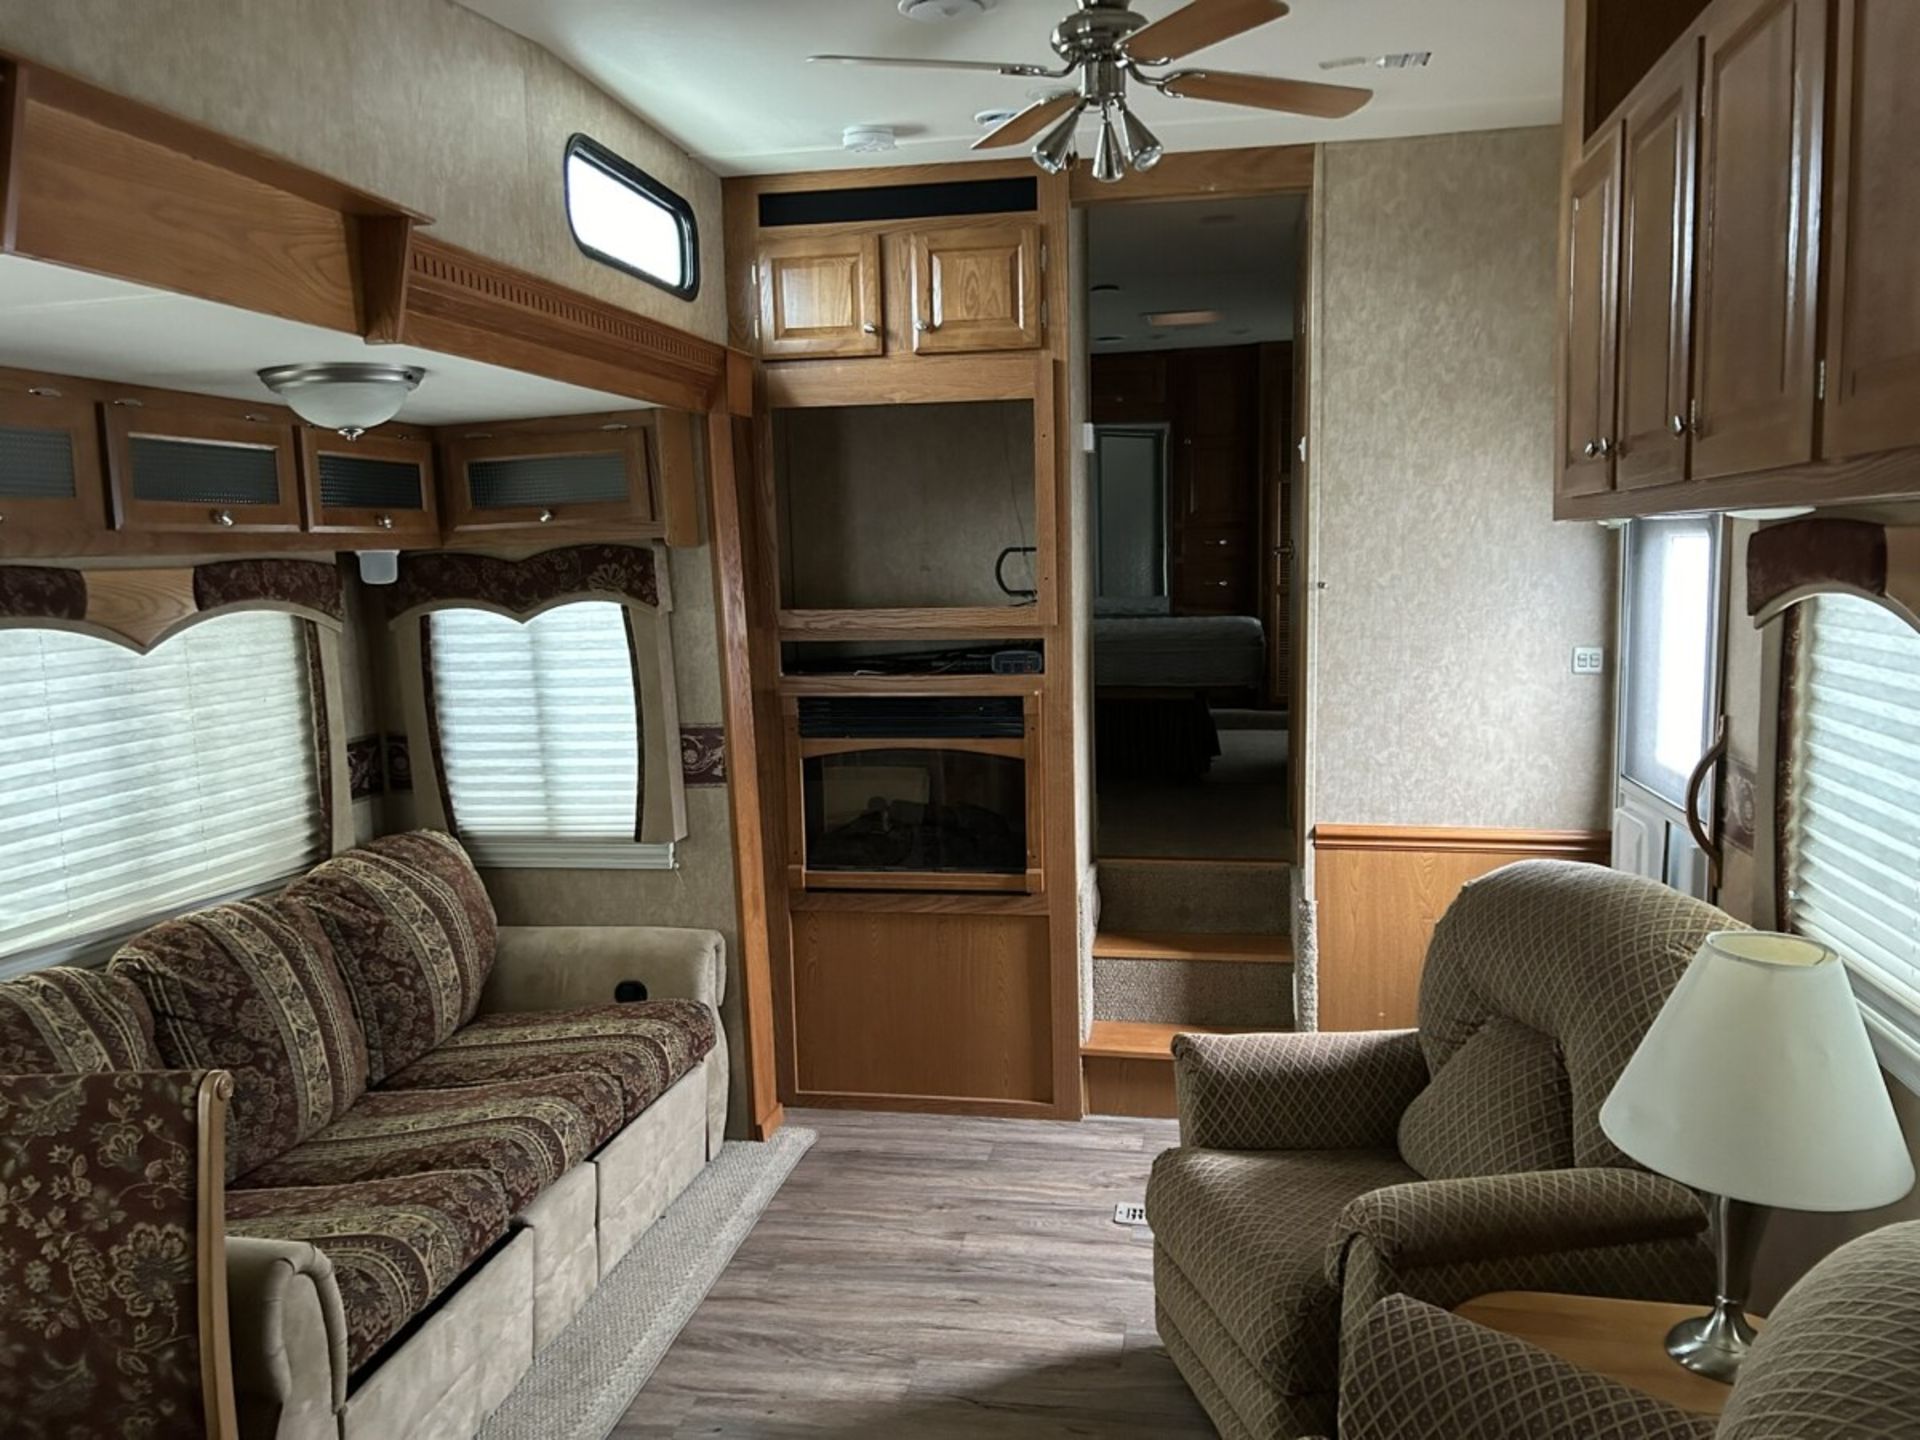 2007 GRAND JUNCTION 29DRK BY DUTCHMEN - DOUBLE SLIDE, AWNING, AC, REAR KITCHEN, FRONT QUEEN - Image 10 of 16